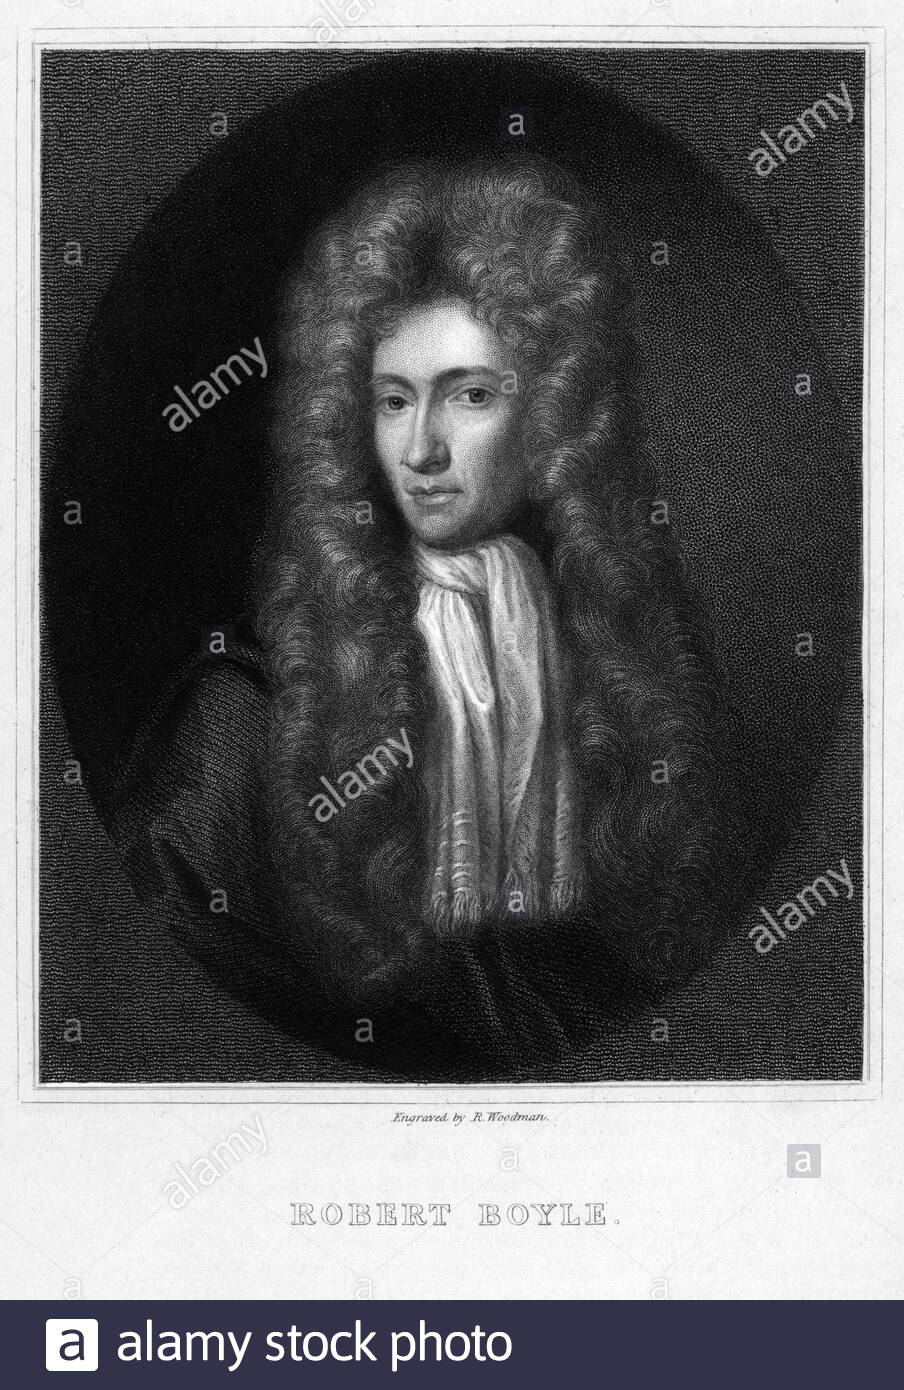 Robert Boyle portrait, 1627 – 1691, was an Anglo-Irish natural philosopher, chemist, physicist, and inventor, vintage illustration from 1880 Stock Photo